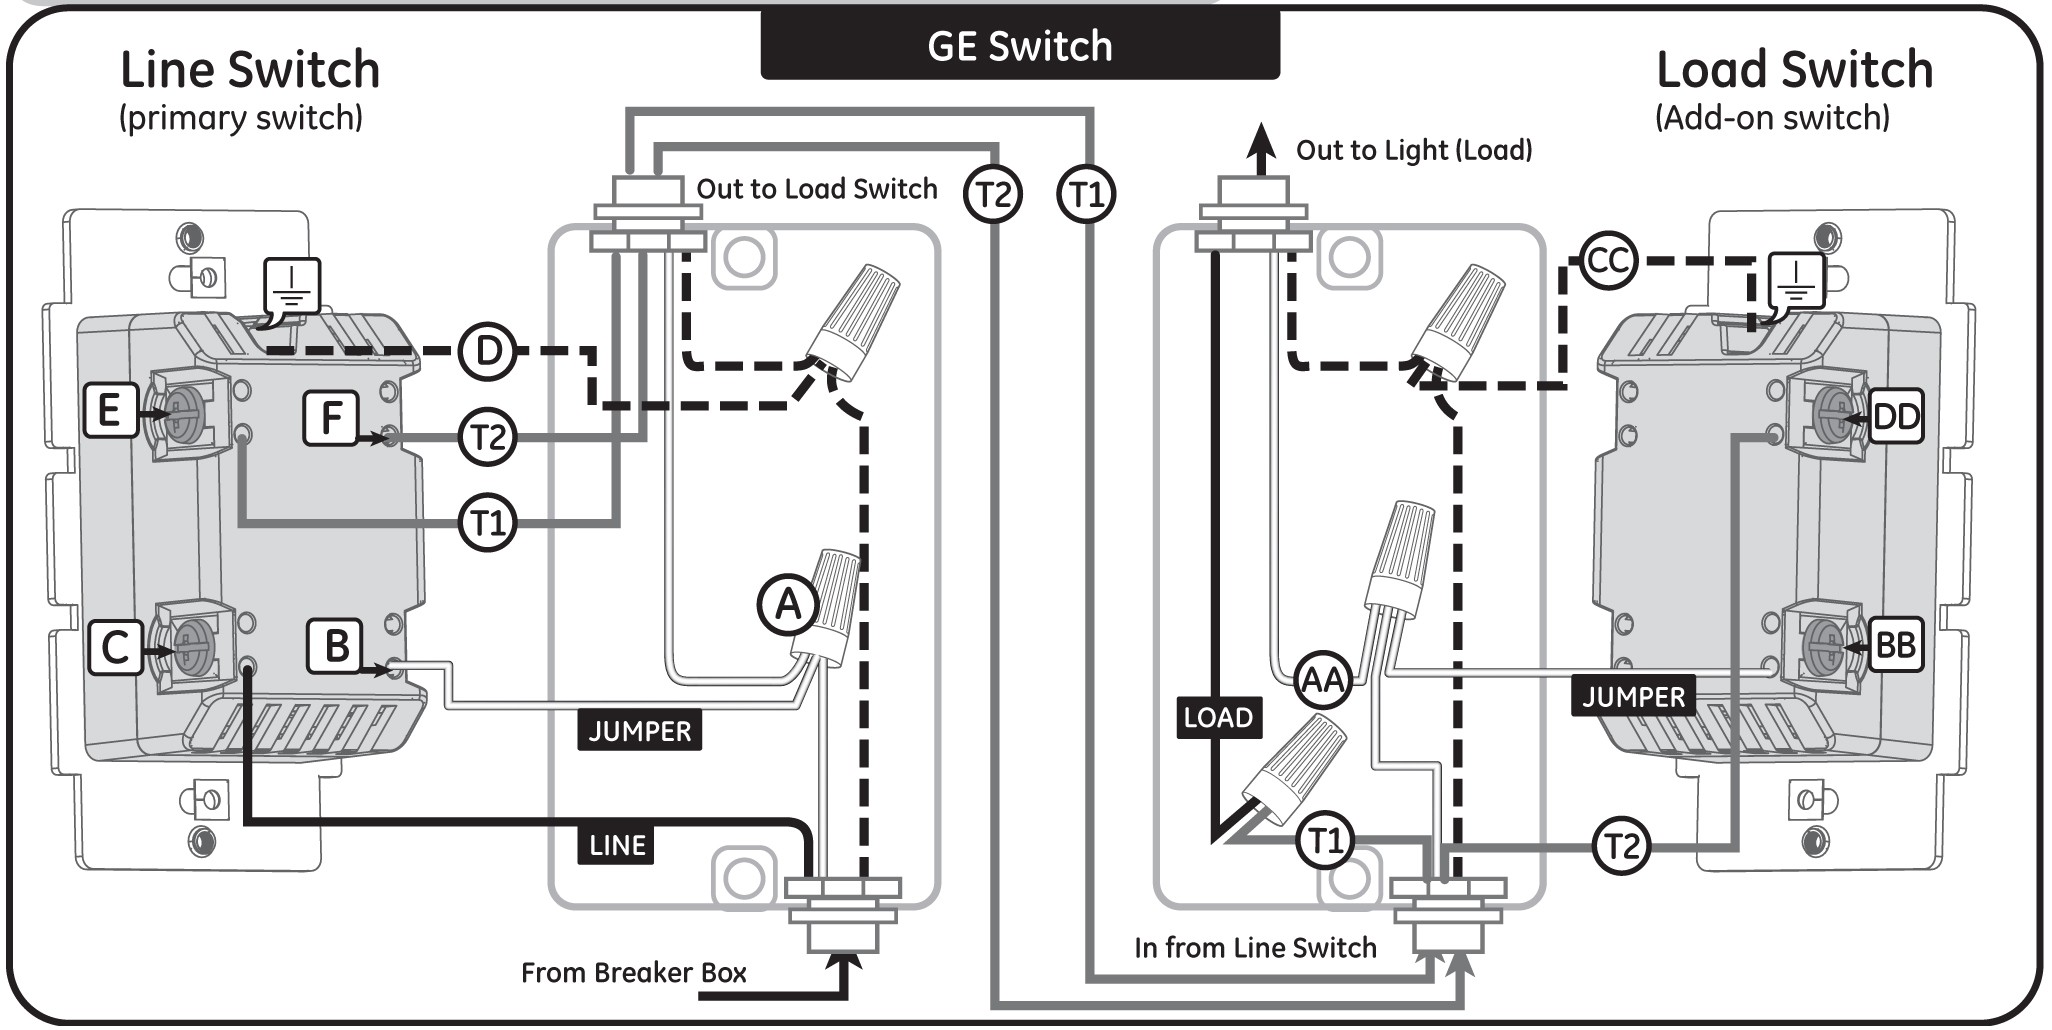 Understanding And Four Way Dimmer Switch Wiringam With Carams Pdf Wiring Diagrams Electricity For Hvac